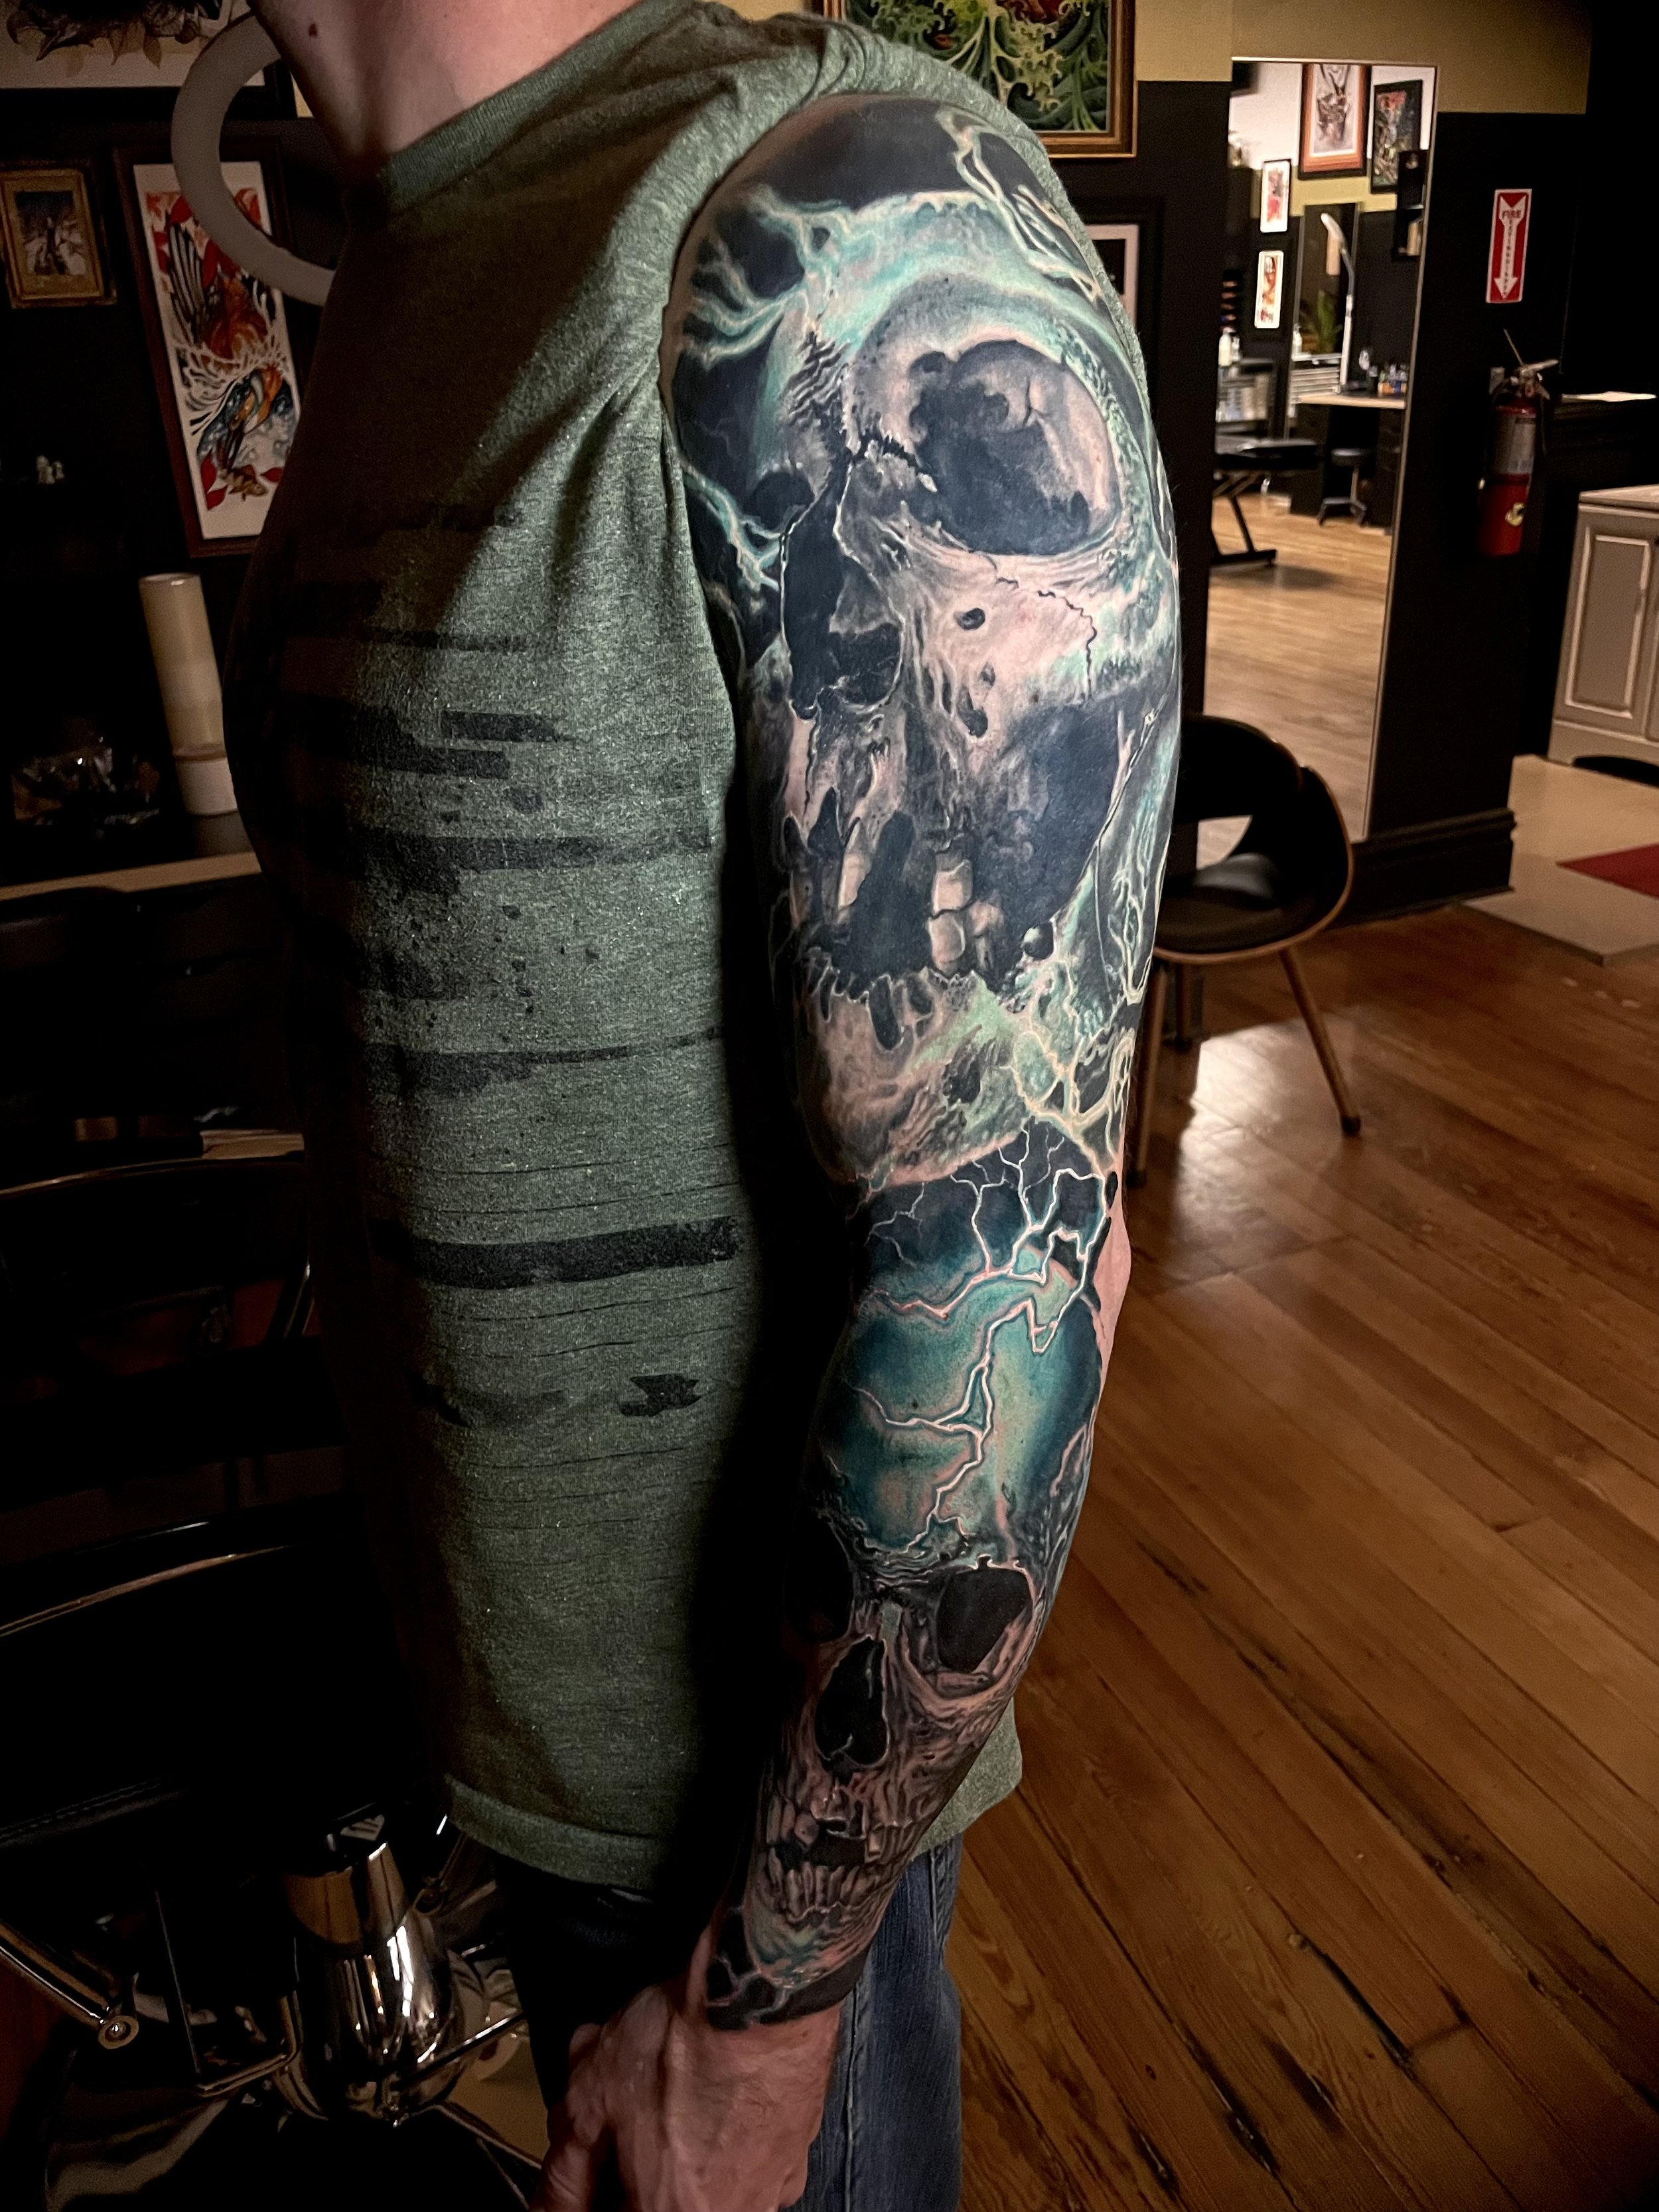 100 Spectacular Sleeve Tattoos Ideas For Men To Get In 2023